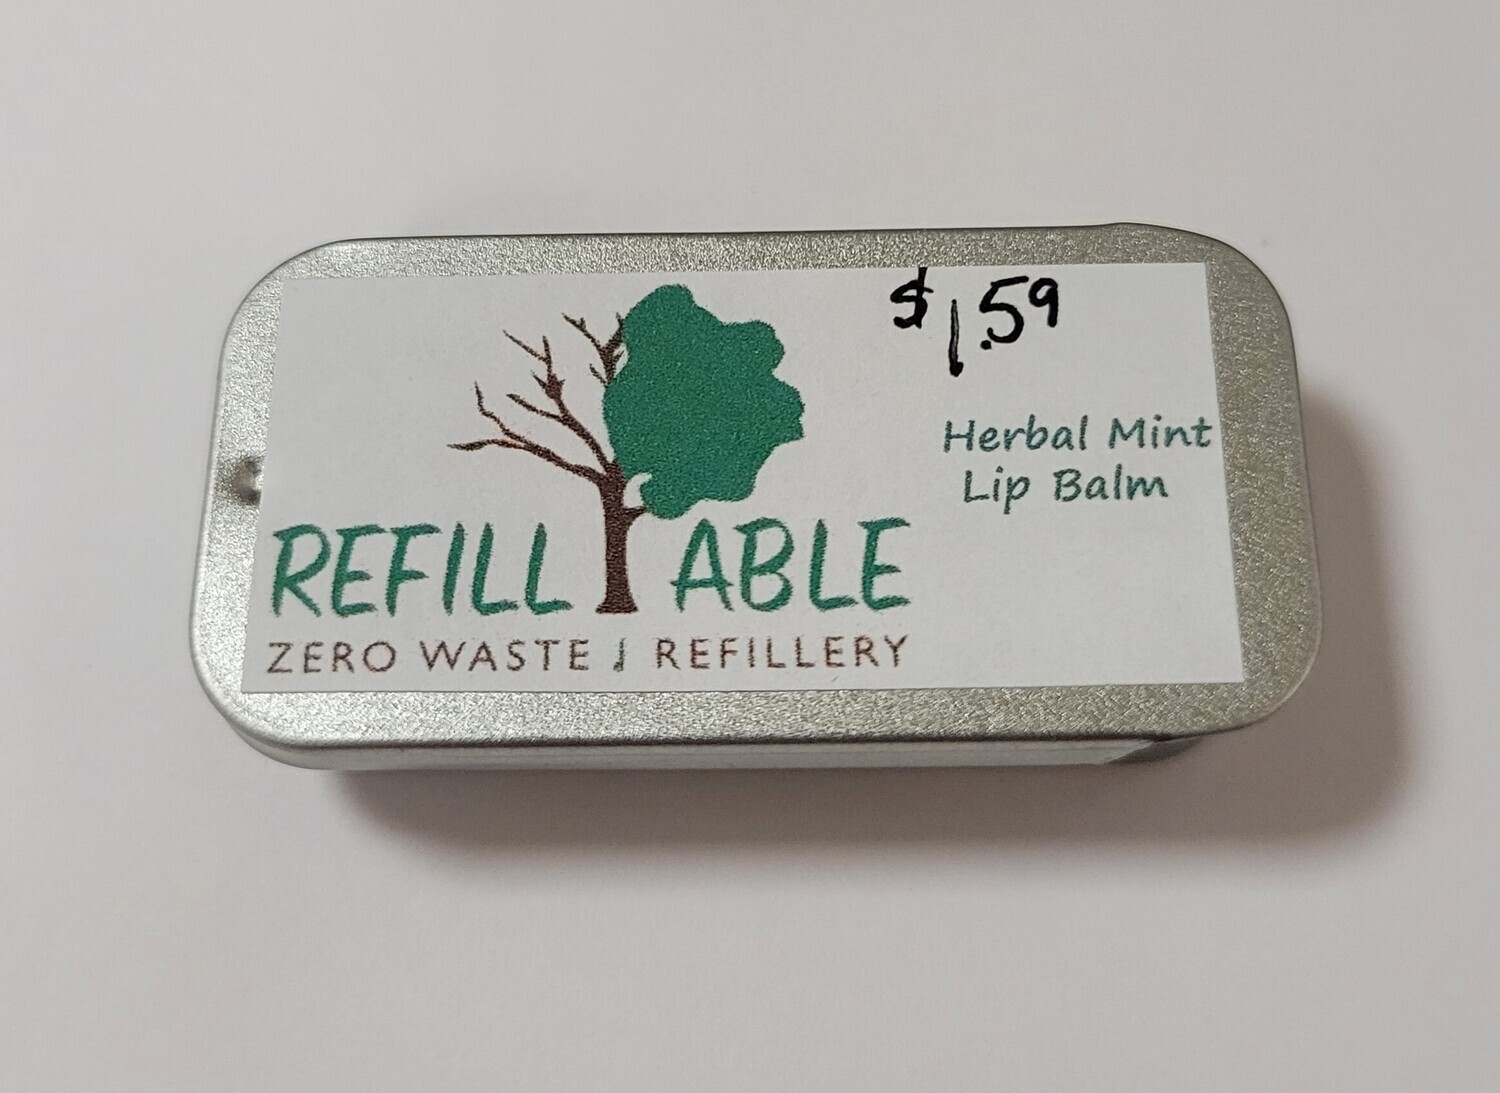 Refill-Able
Rectangle Lip Balm Tin
Herbal Mint Flavored